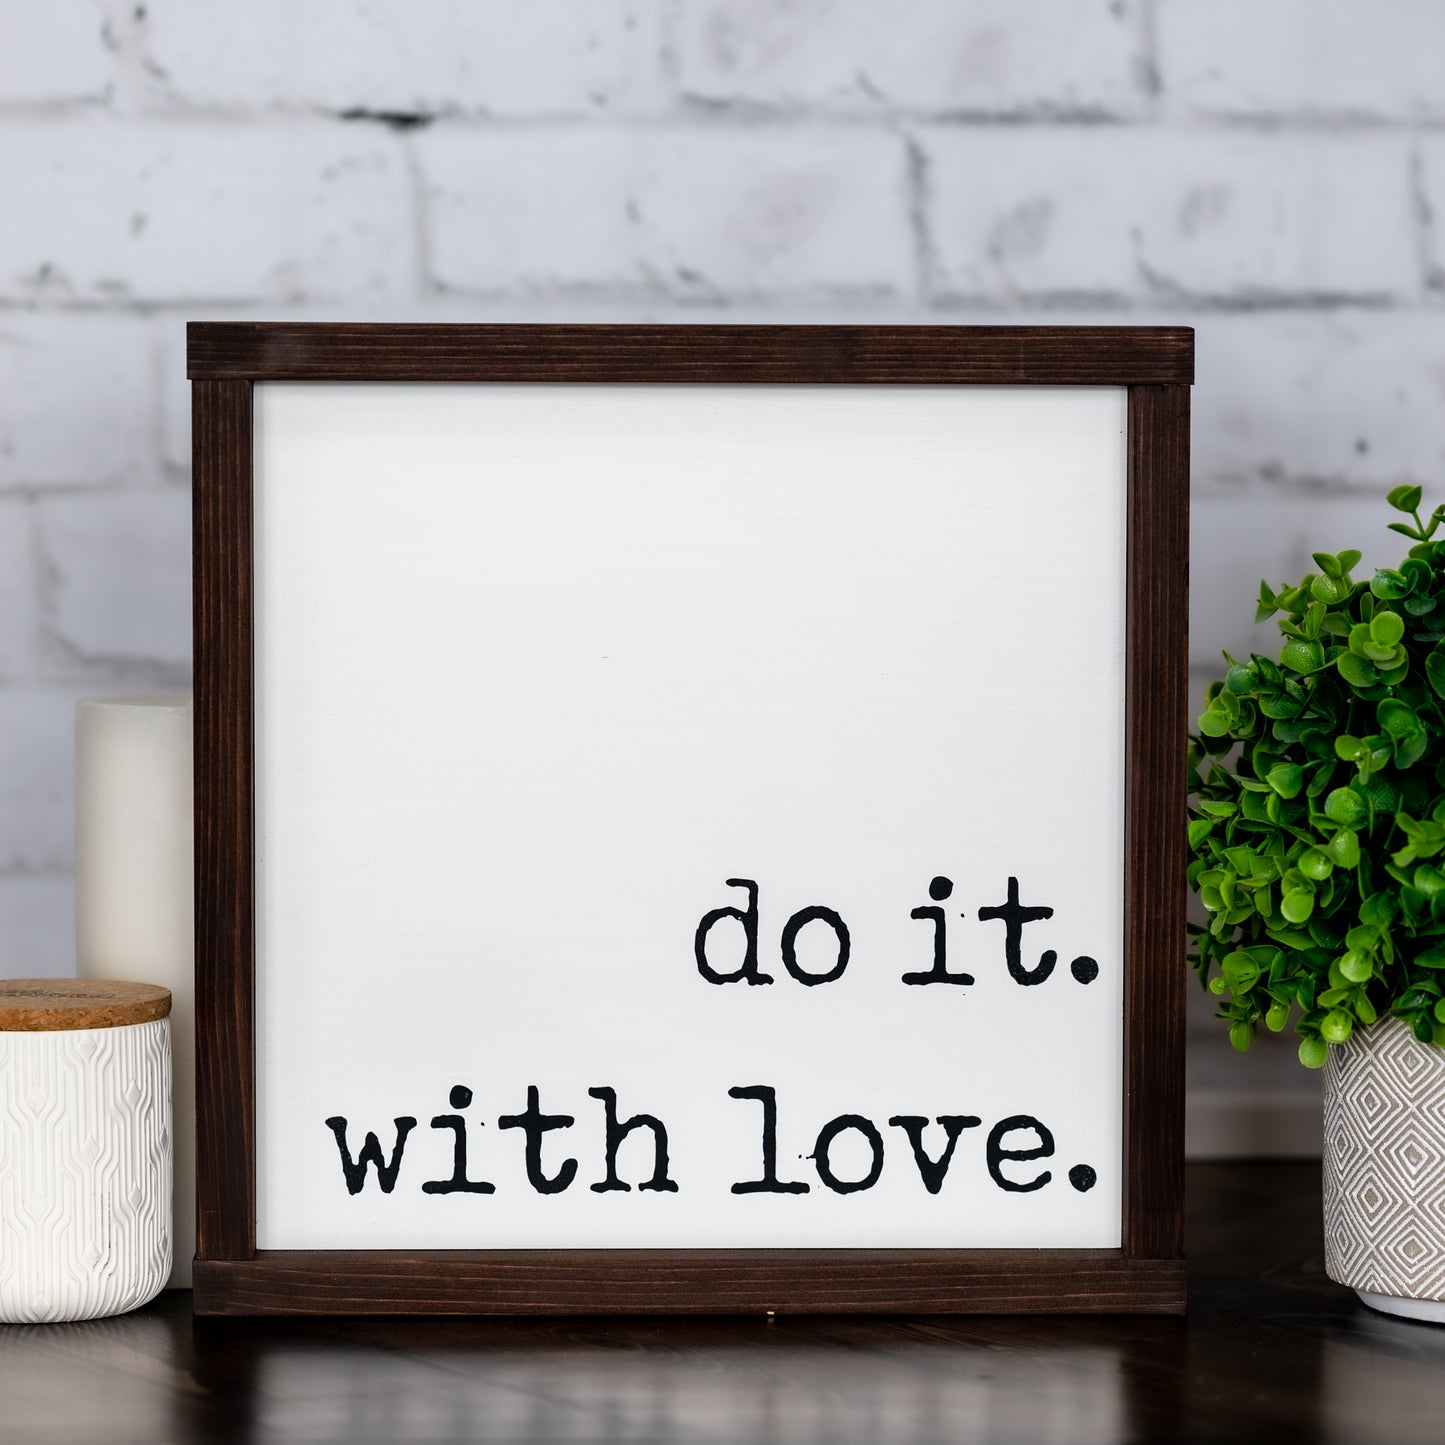 do it. with love.  ~ wood sign